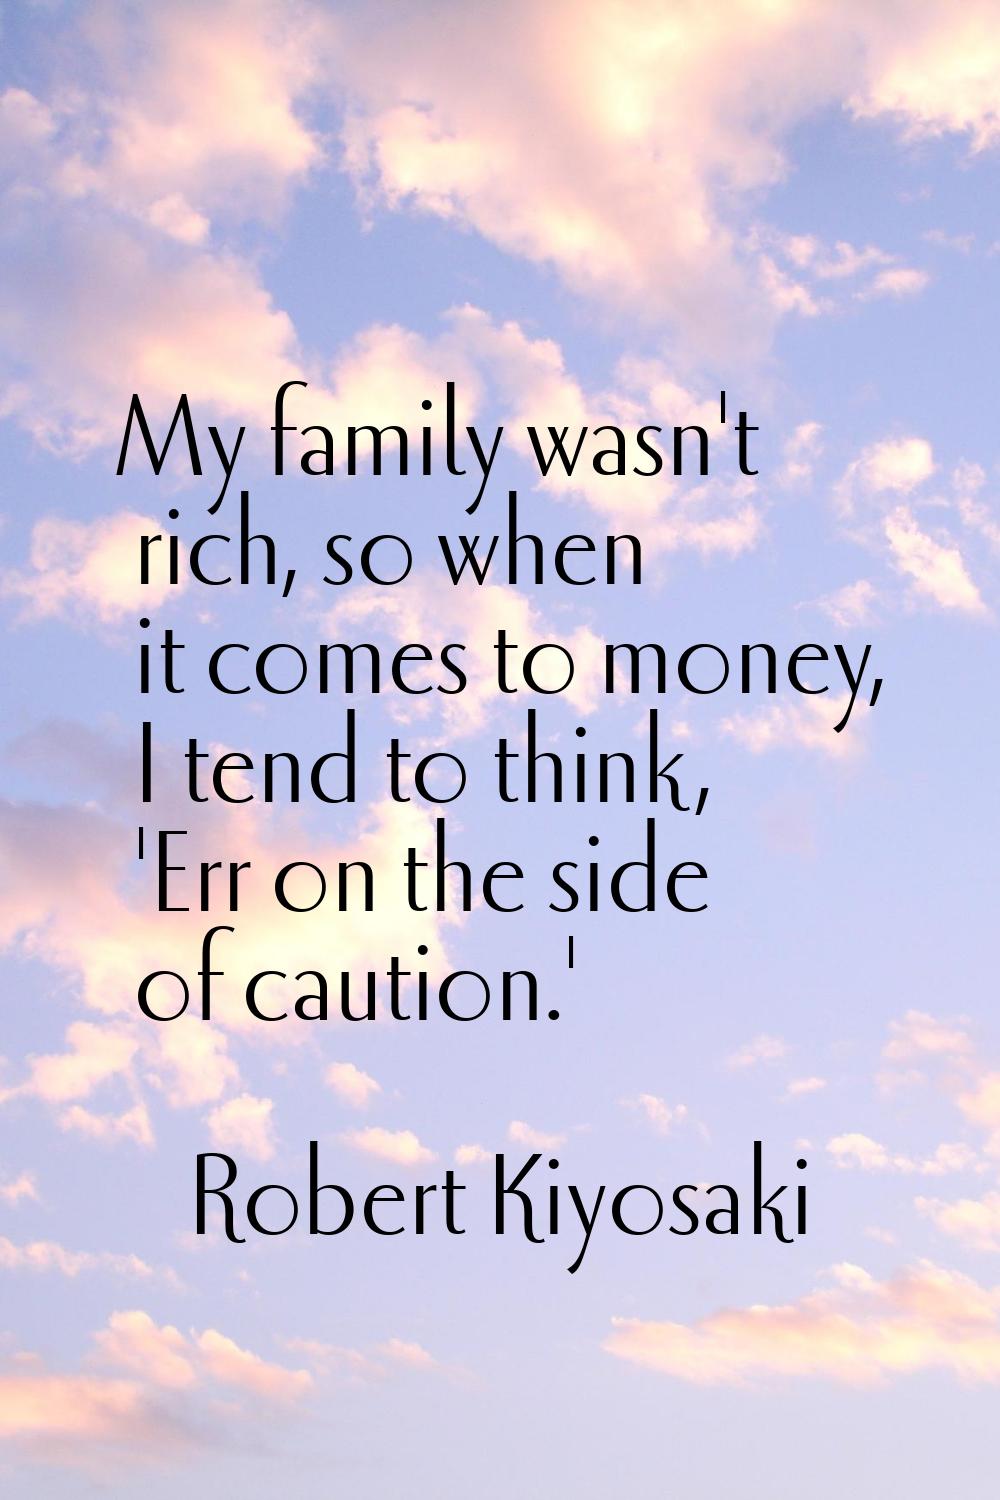 My family wasn't rich, so when it comes to money, I tend to think, 'Err on the side of caution.'